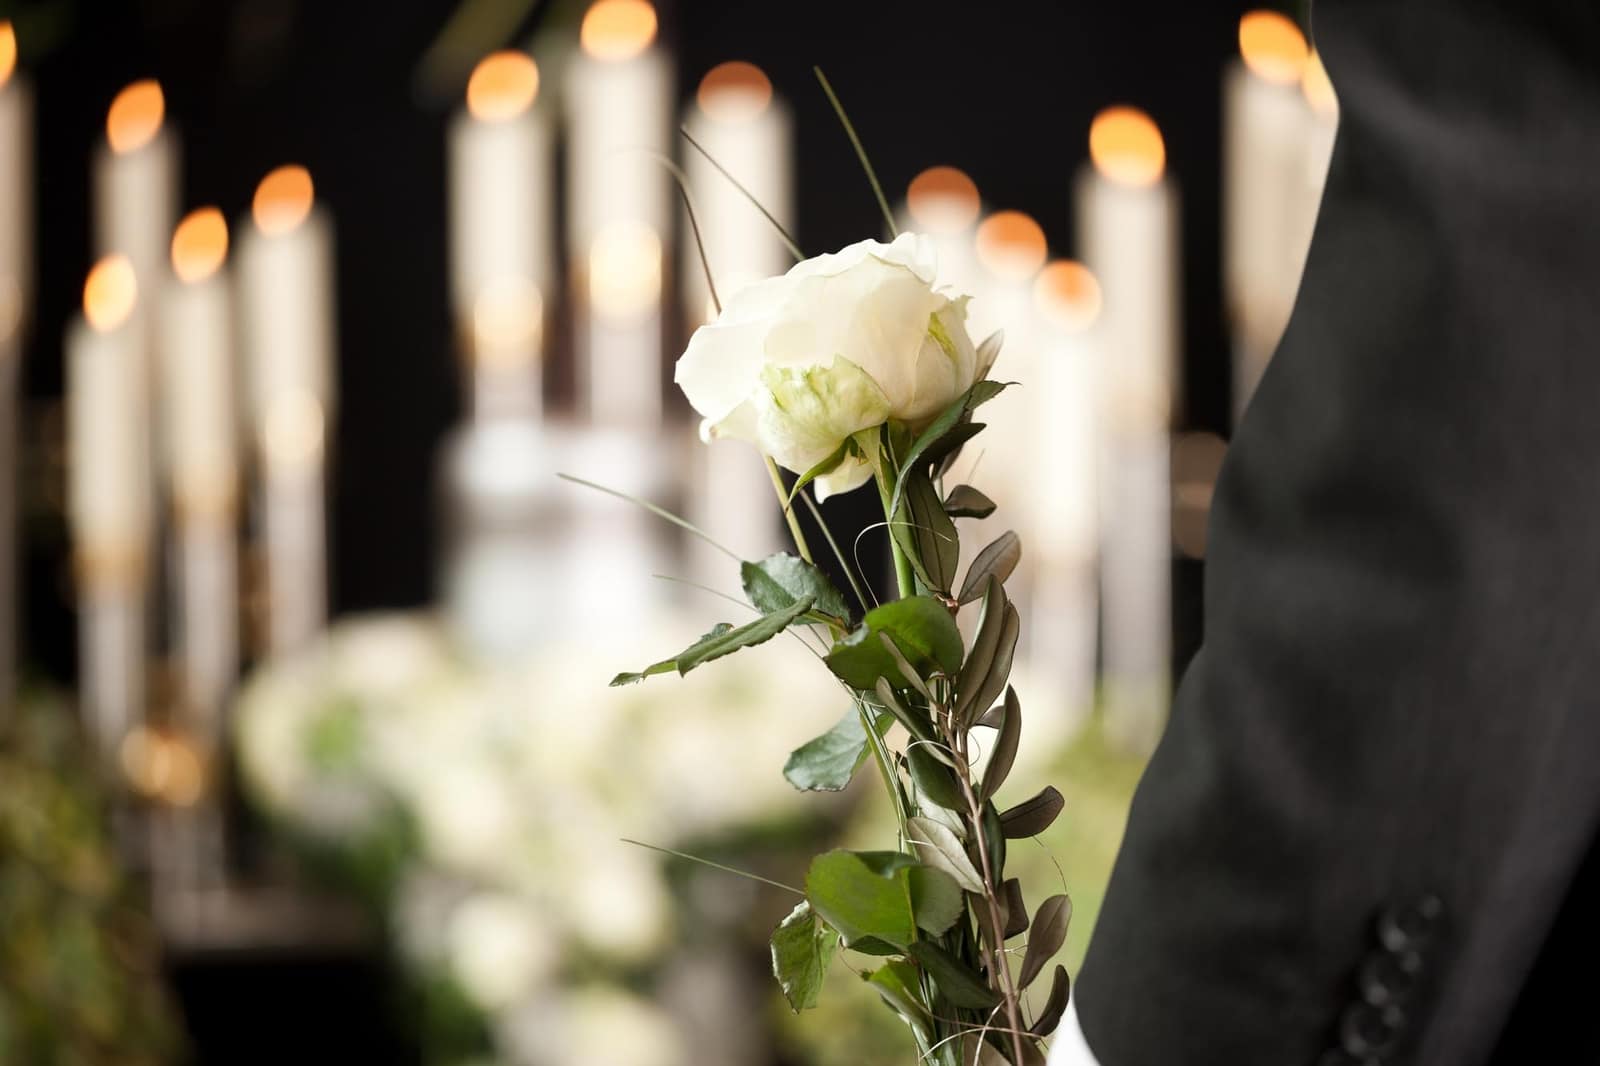 Funeral Etiquette and tips for funerals at People's Funeral and Cremation Service